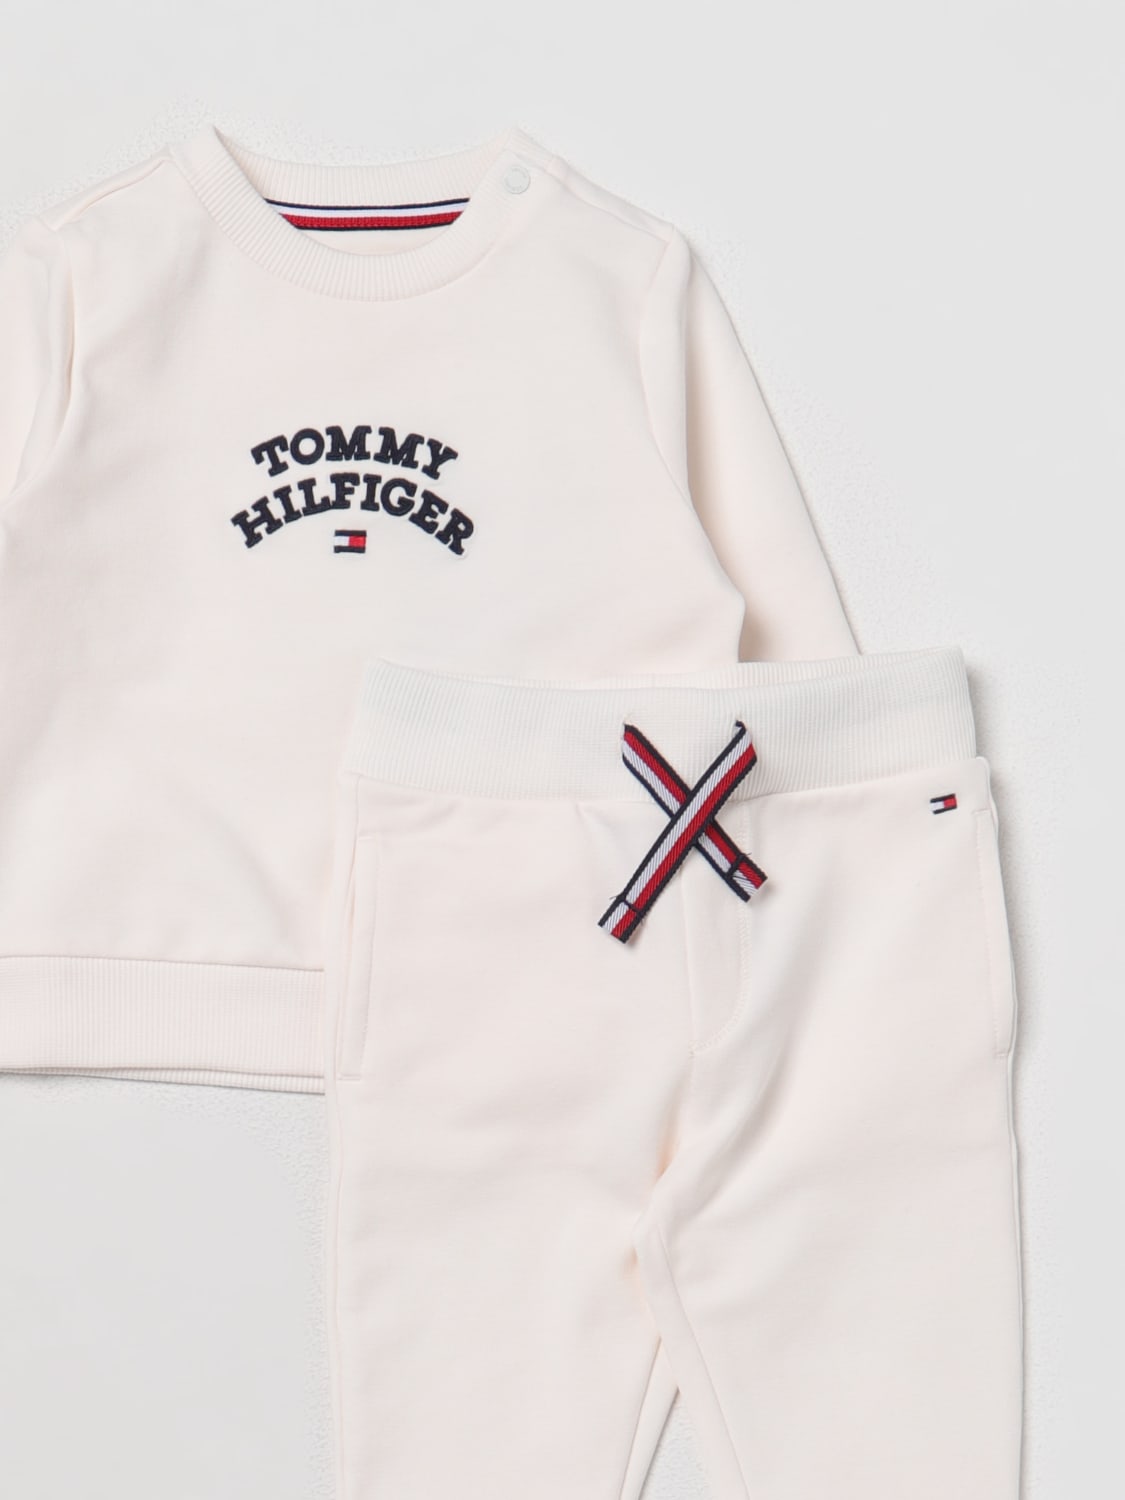 TOMMY HILFIGER: Baby Weiß Tommy Baby-Overall | Hilfiger KN0KN01788 Baby-Overall online - auf